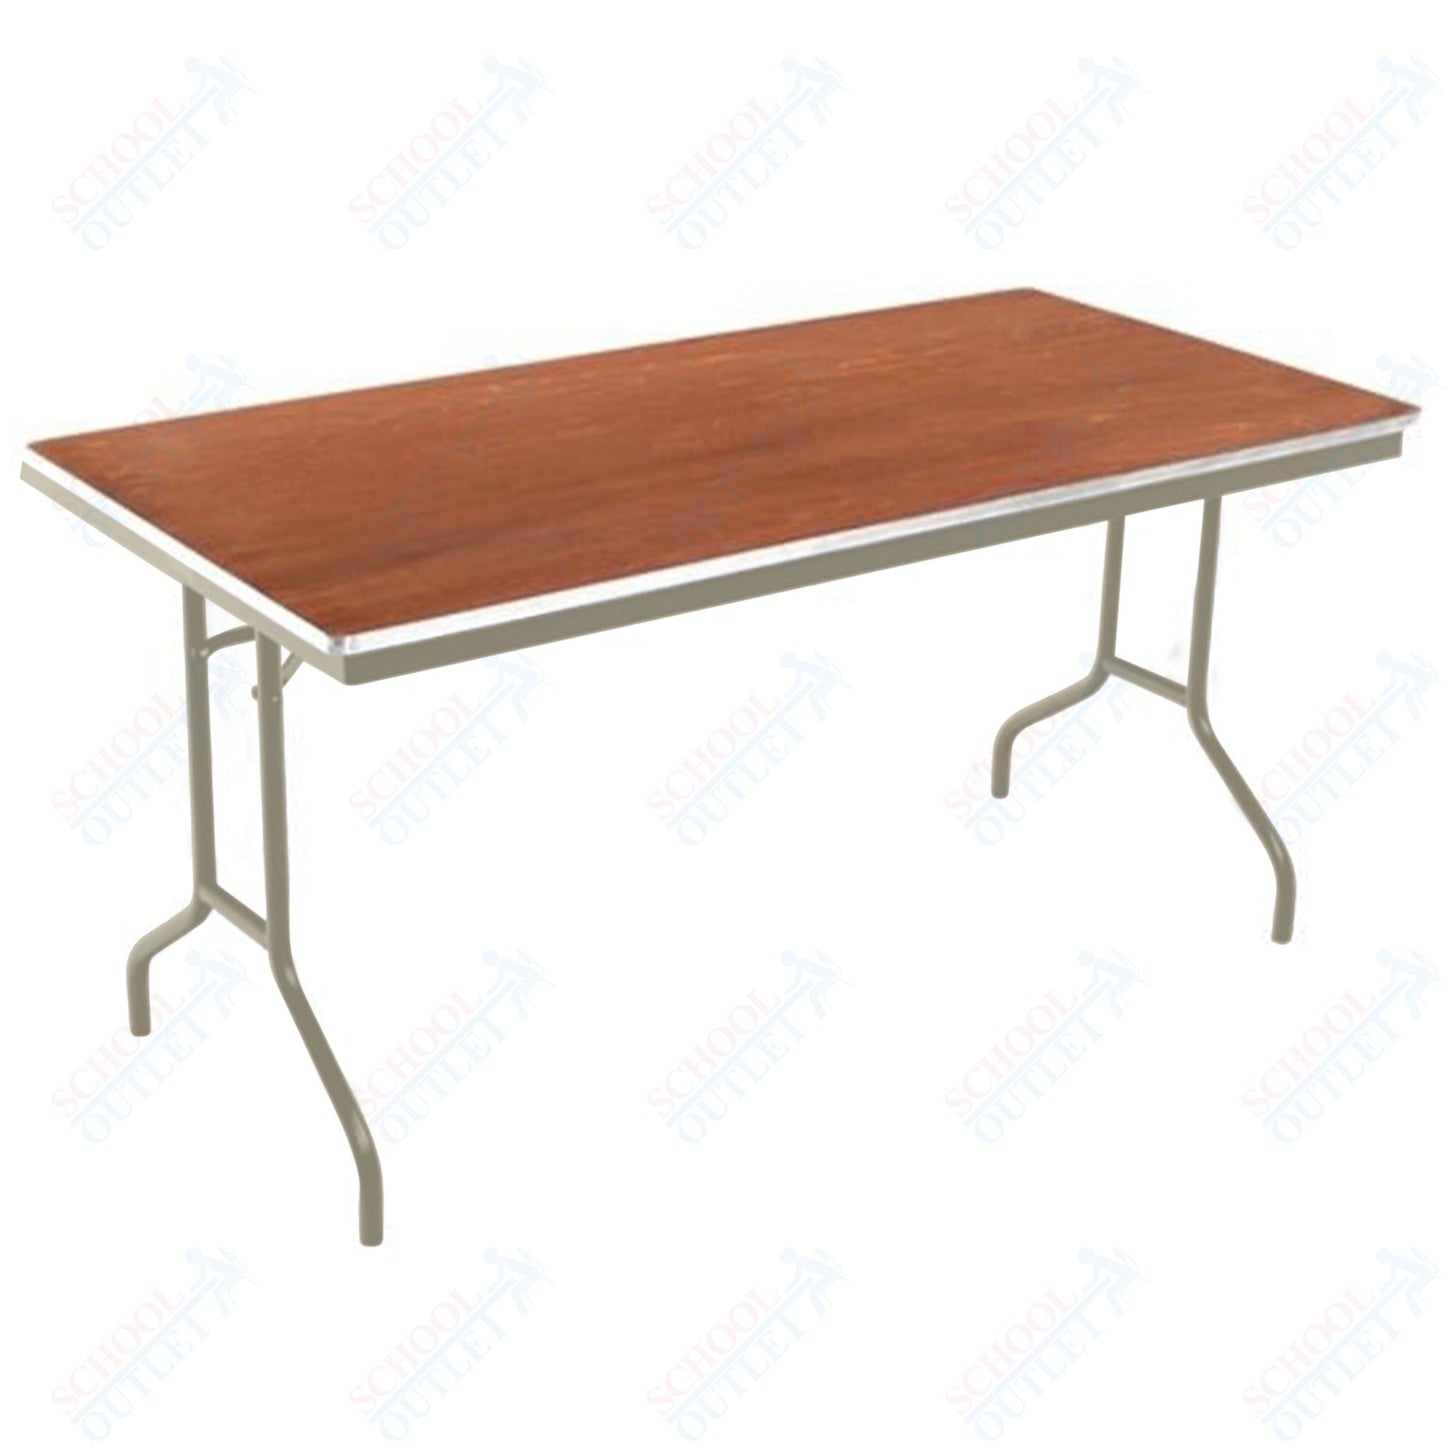 AmTab Folding Table - Plywood Stained and Sealed - Aluminum Edge - 18"W x 60"L x 29"H  (AmTab AMT-185PA)